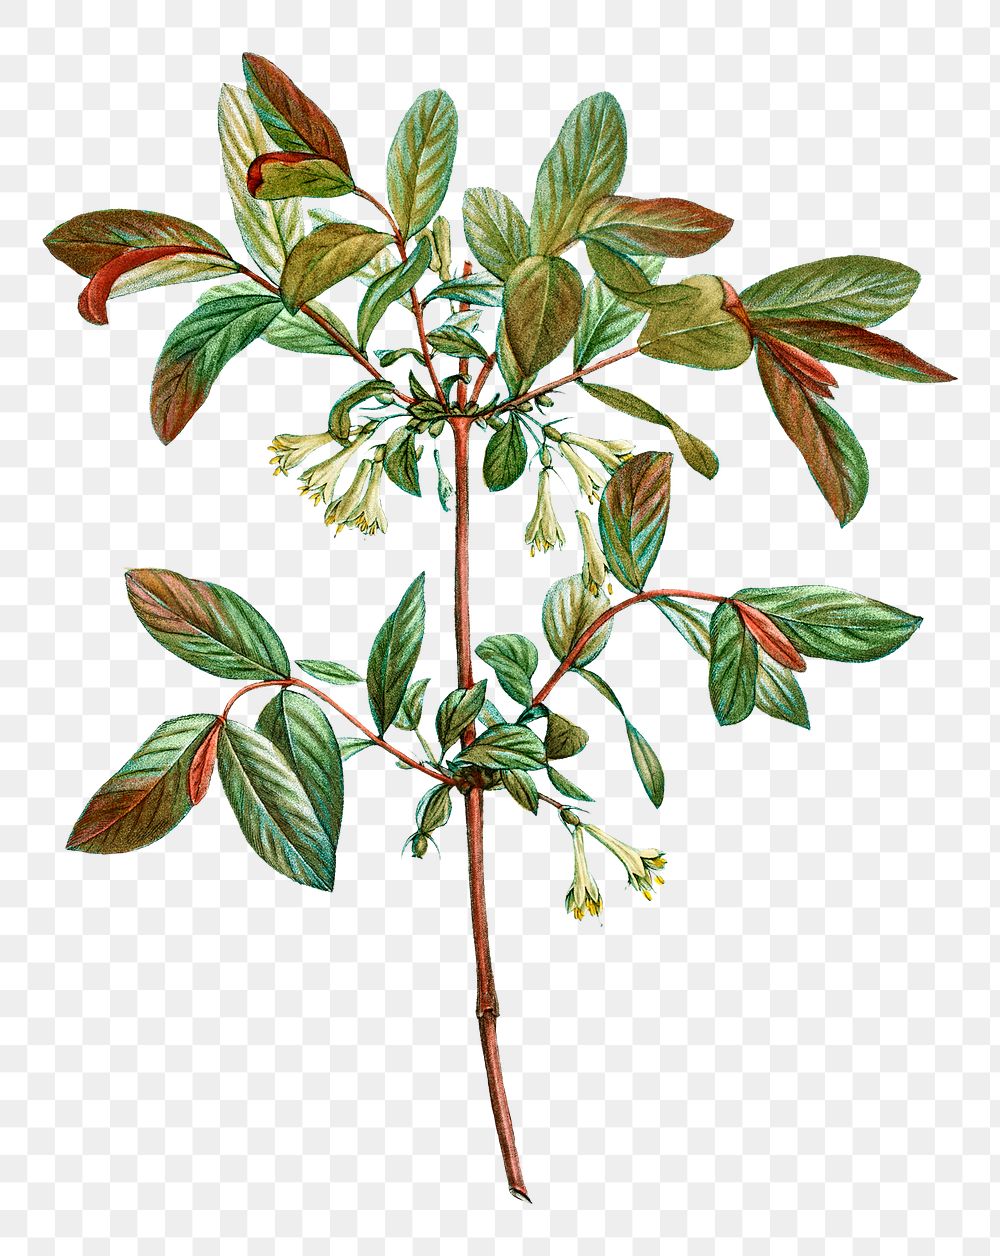 Blossoming honeyberry plant transparent png